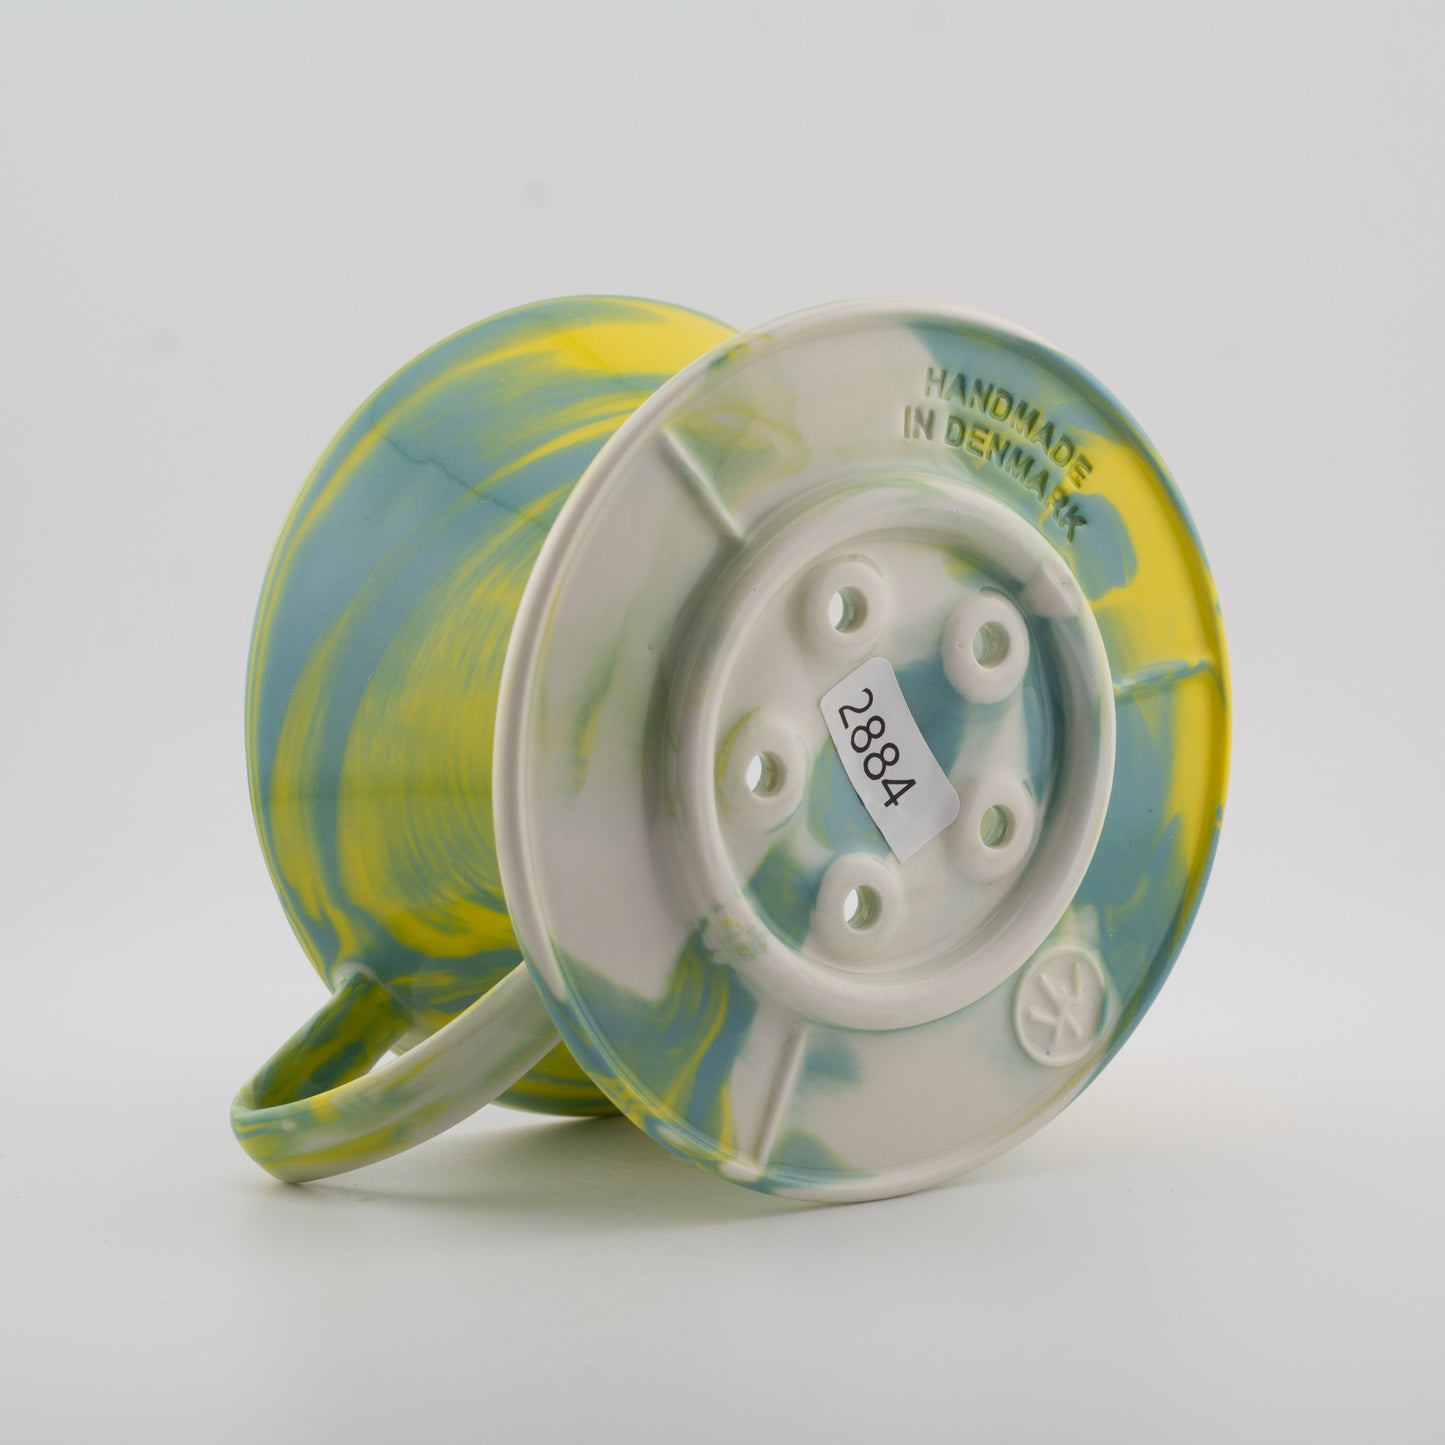 MK Dripper - Yellow/Turquoise/White - Unique mix wave - Preorder